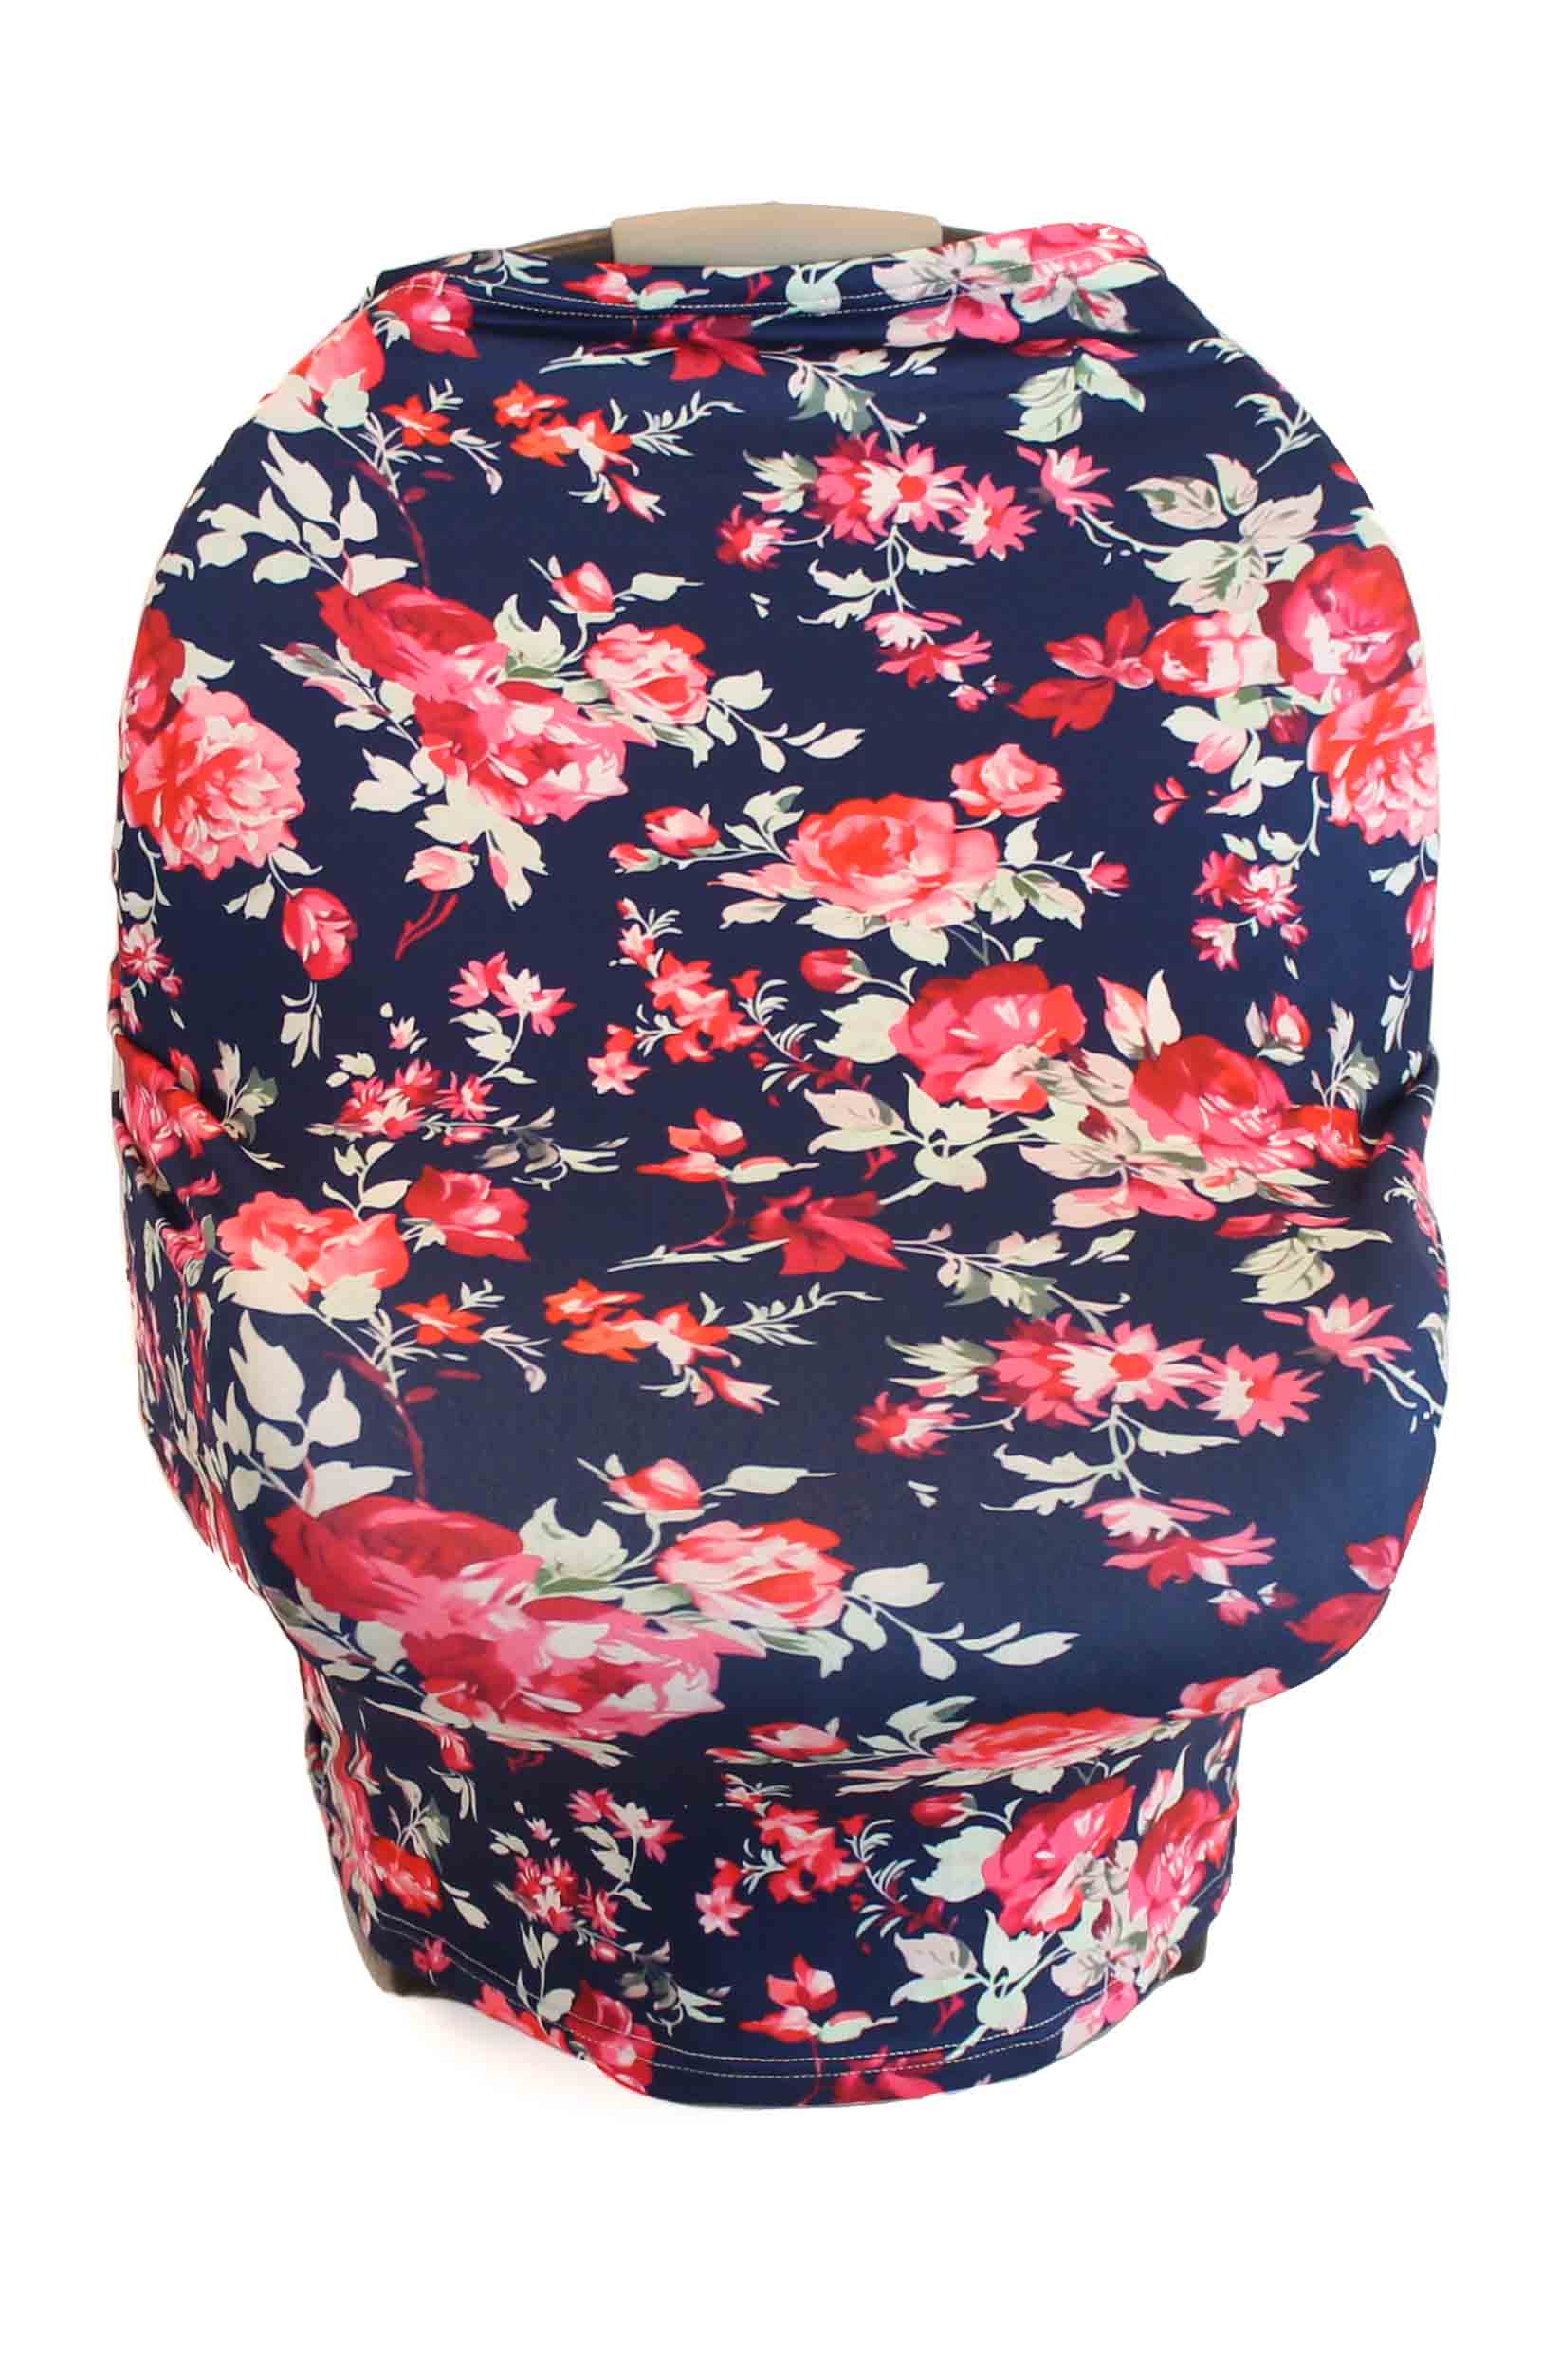 Navy Spring Floral Multi-Use Stretchy Car Seat Cover and Nursing Poncho All In One, New Baby Gift